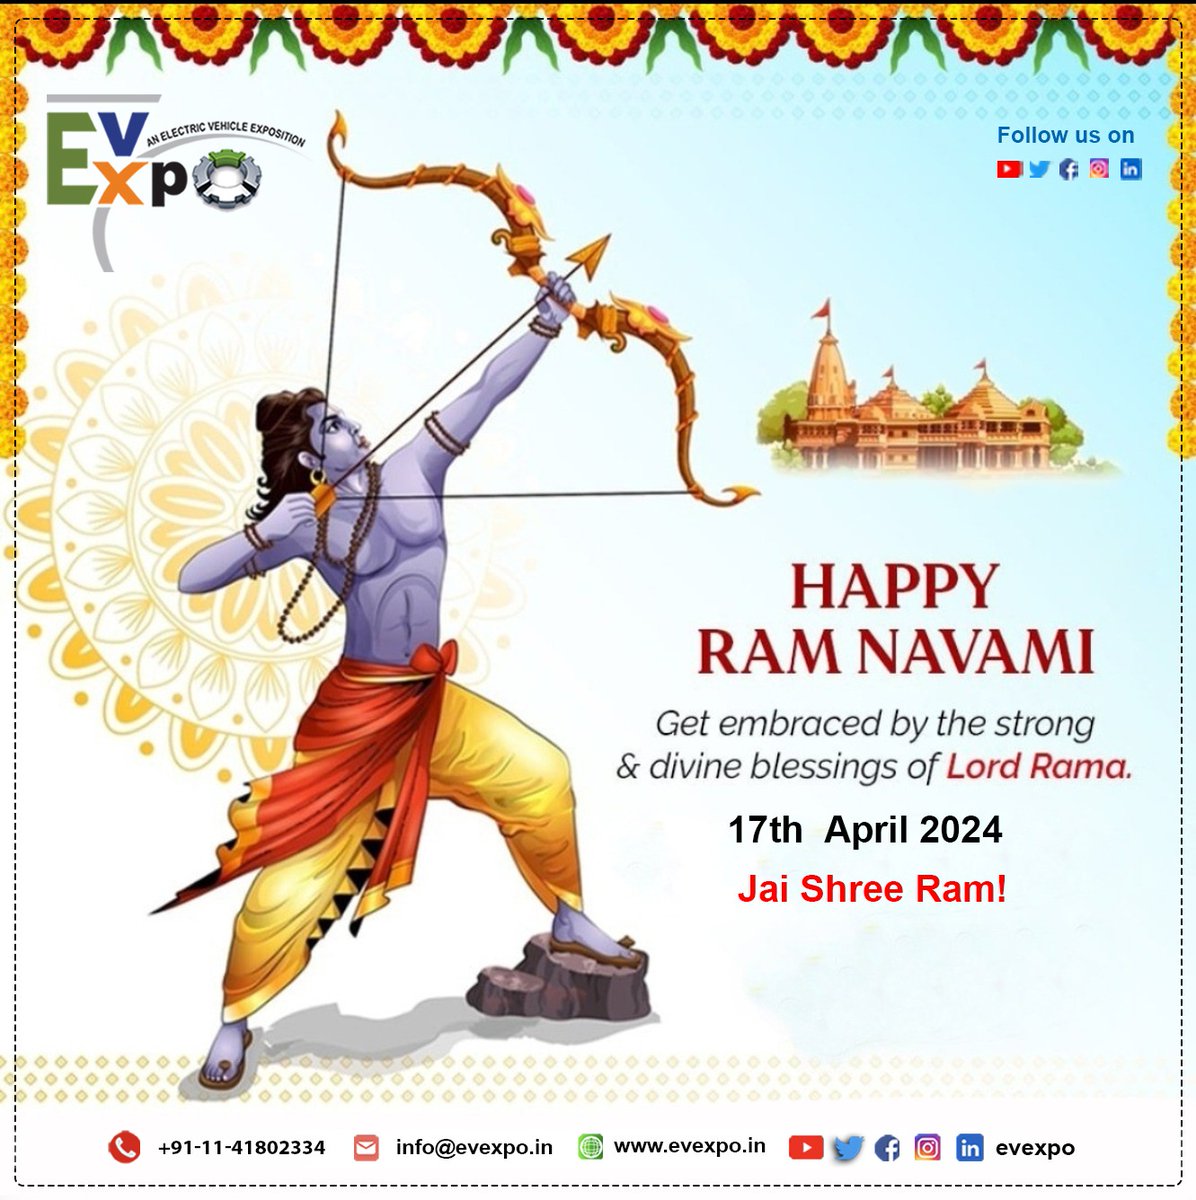 '🎉 Celebrating the auspicious occasion of Ram Navami at EvExpo! Amidst the innovative buzz of electric vehicles, we honor Lord Rama's birth with devotion and zeal. Wishing everyone a blessed Ram Navami. Jai Shri Ram! 🚗⚡' #RamNavami #RamNavami2024 #BeHappy #JaiShriRam